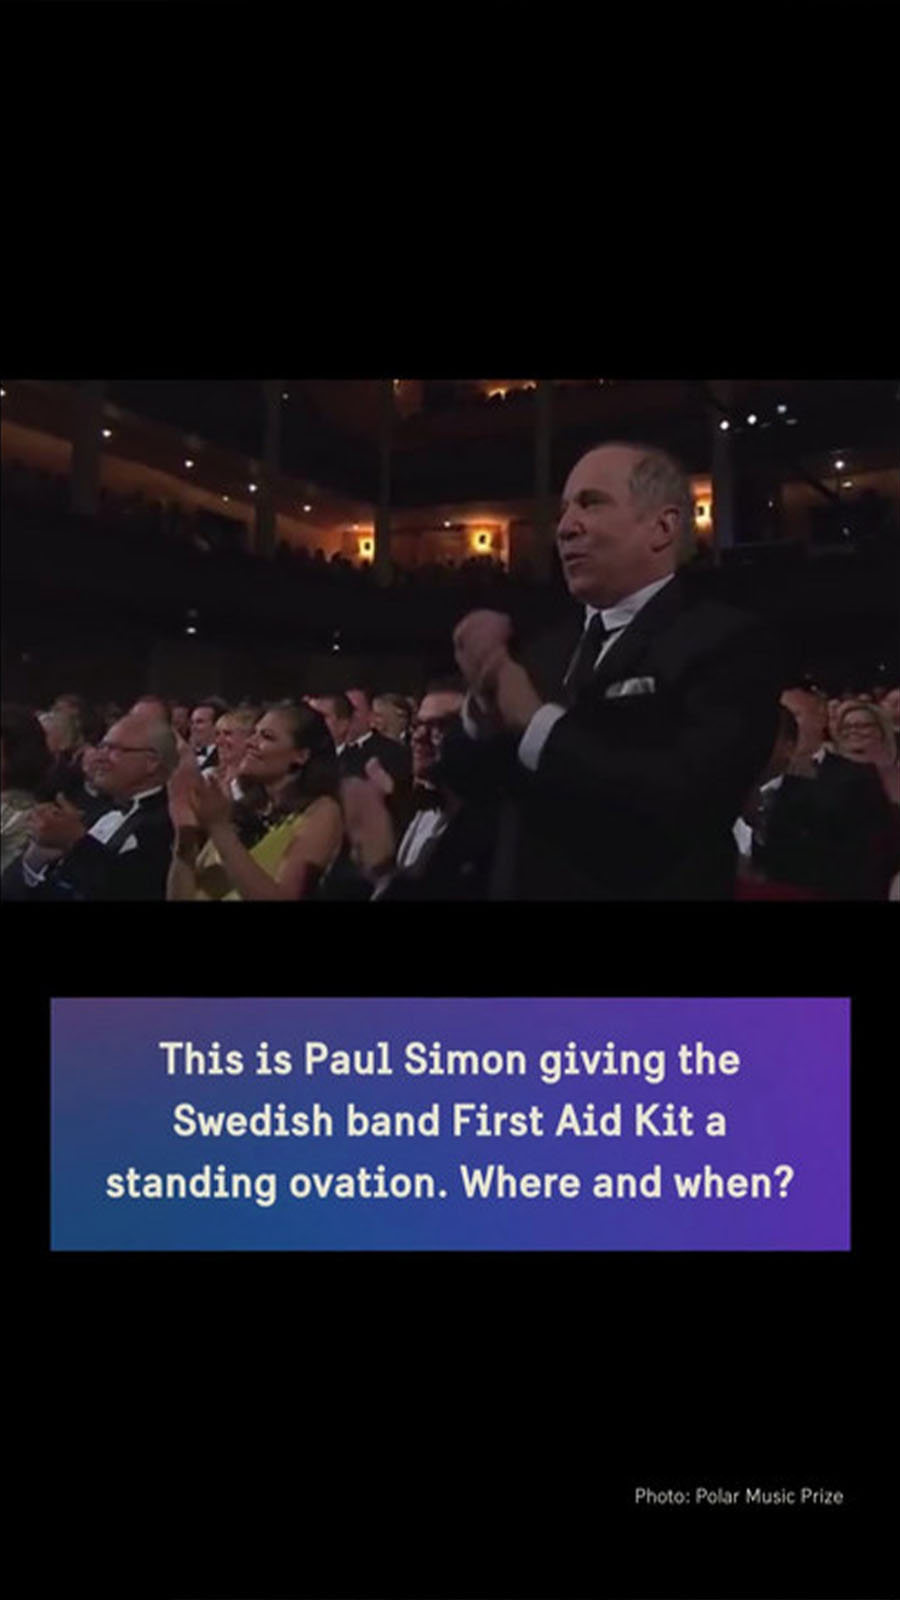 Paul Simon giving a standing ovation as a member of the audience.